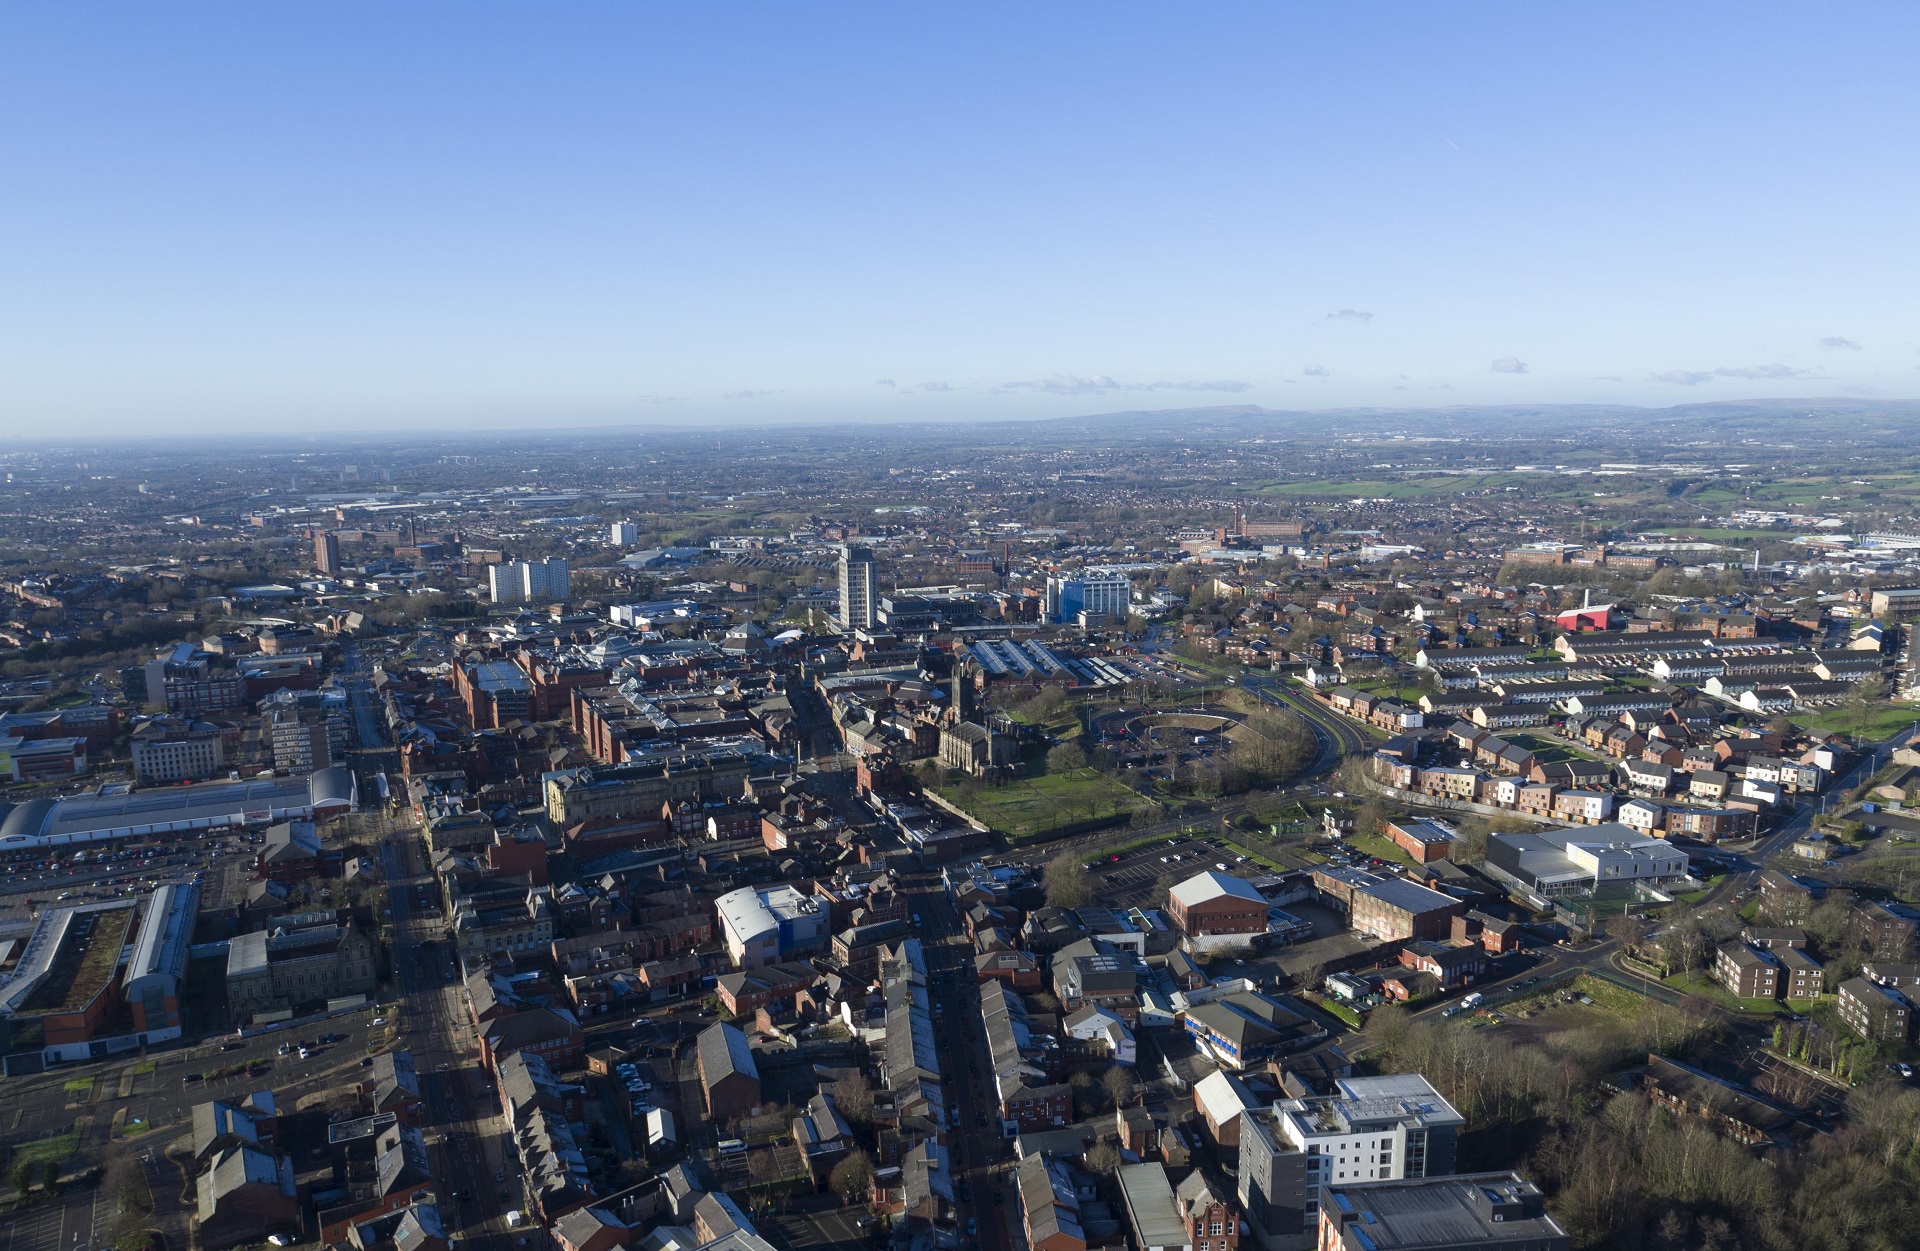 An aerial view of Oldham on a clear day